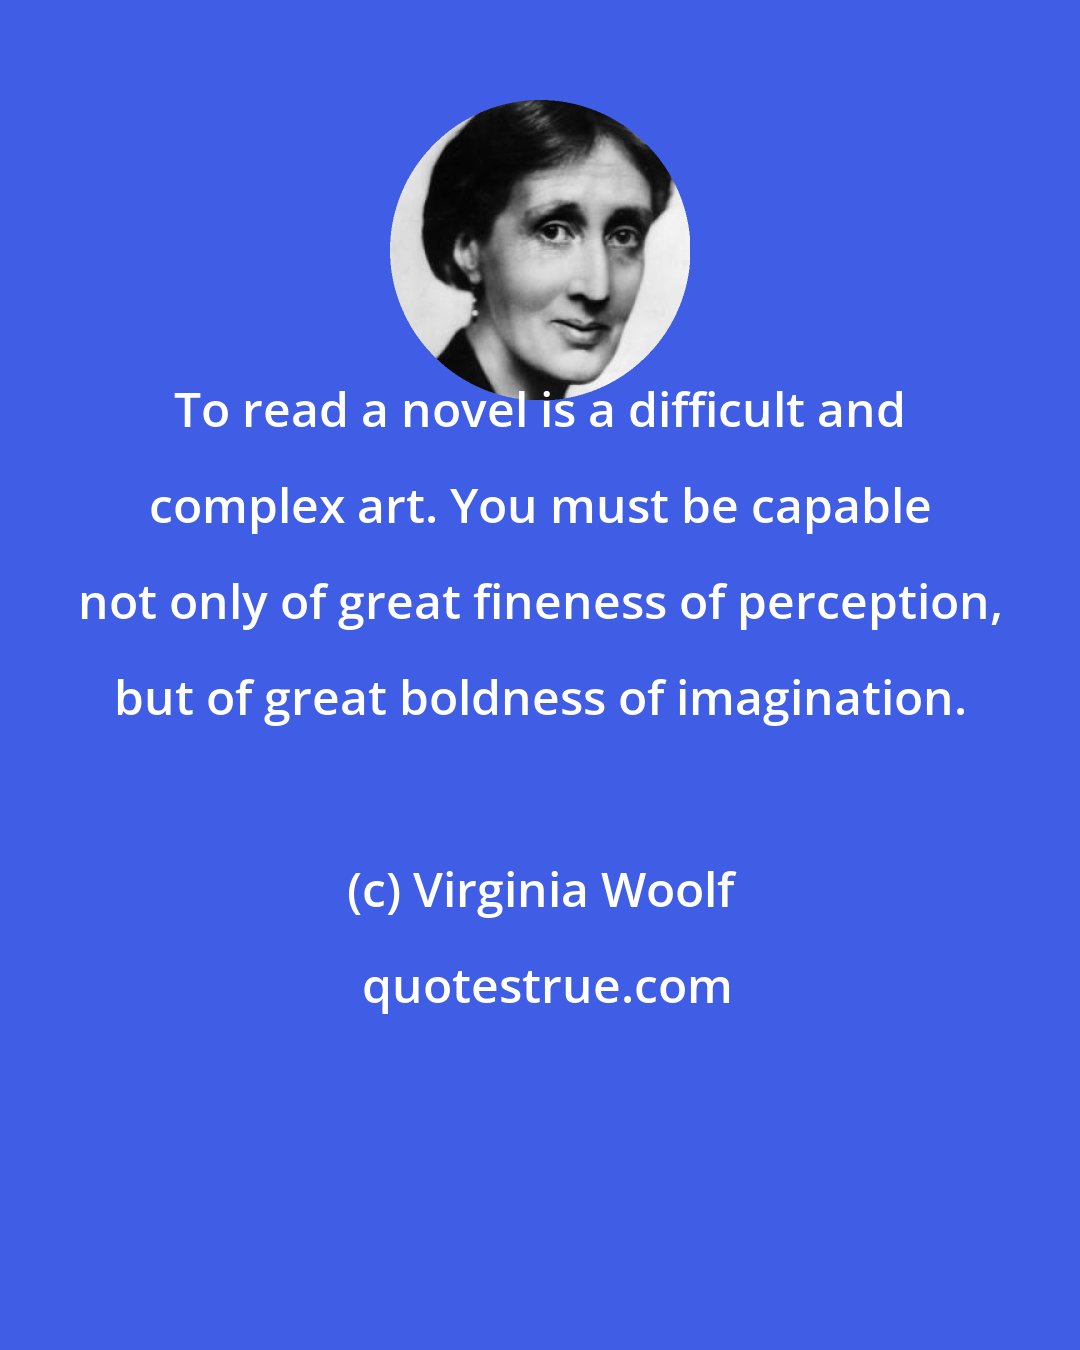 Virginia Woolf: To read a novel is a difficult and complex art. You must be capable not only of great fineness of perception, but of great boldness of imagination.